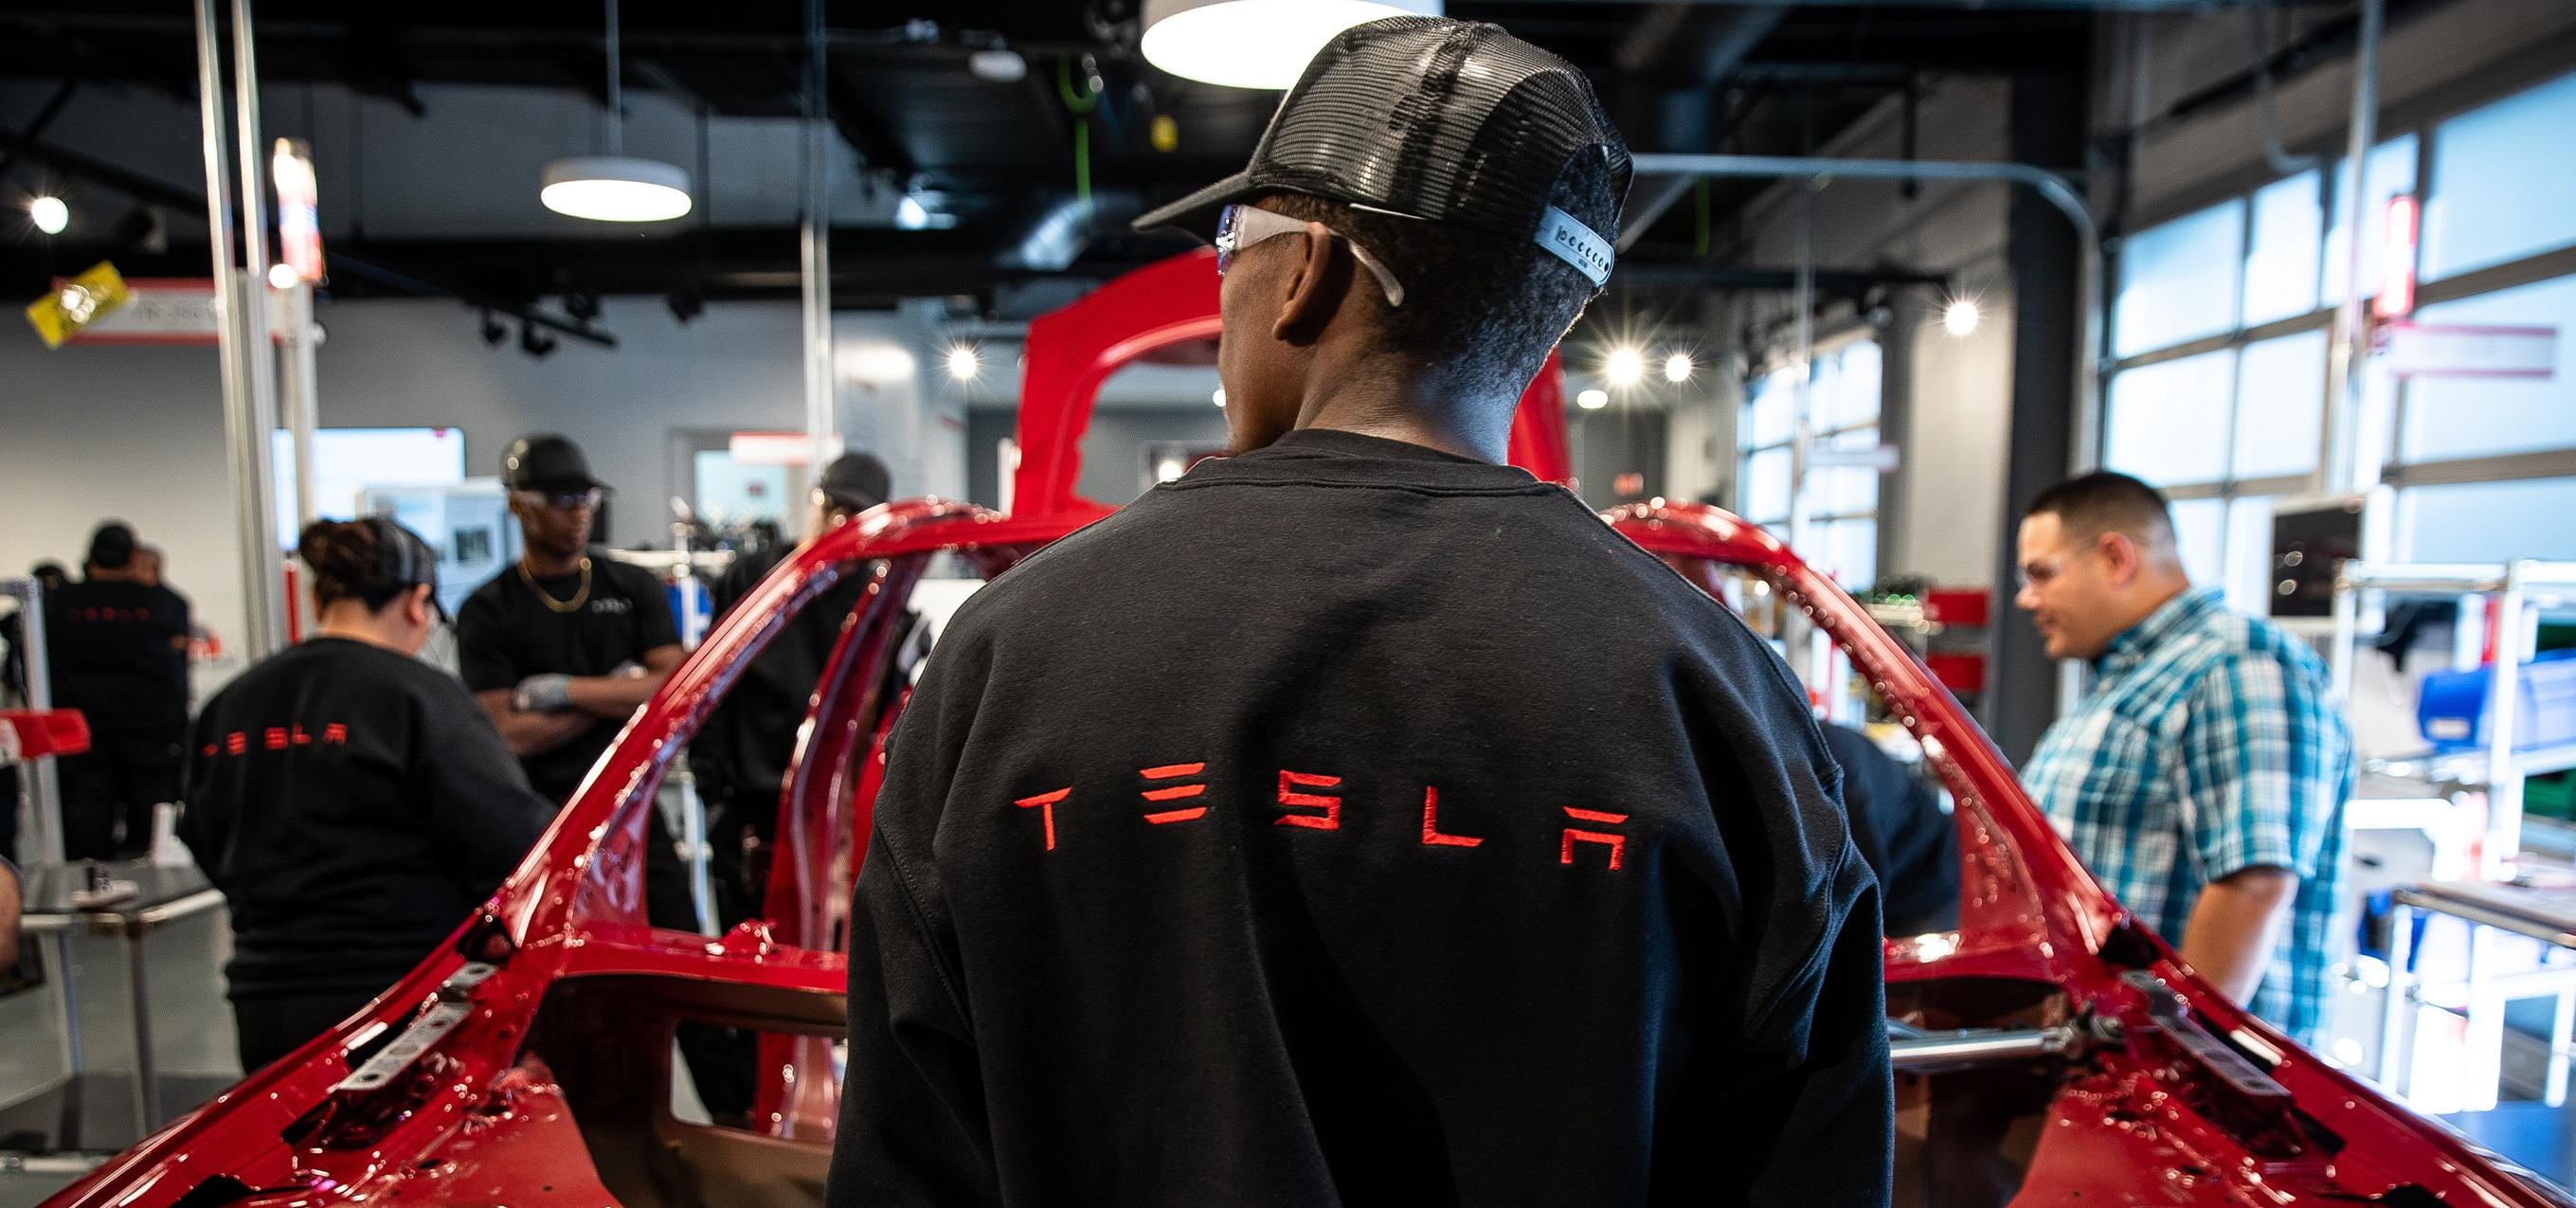 Tesla ordered to pay over ₹1,000 crore to former worker over racism